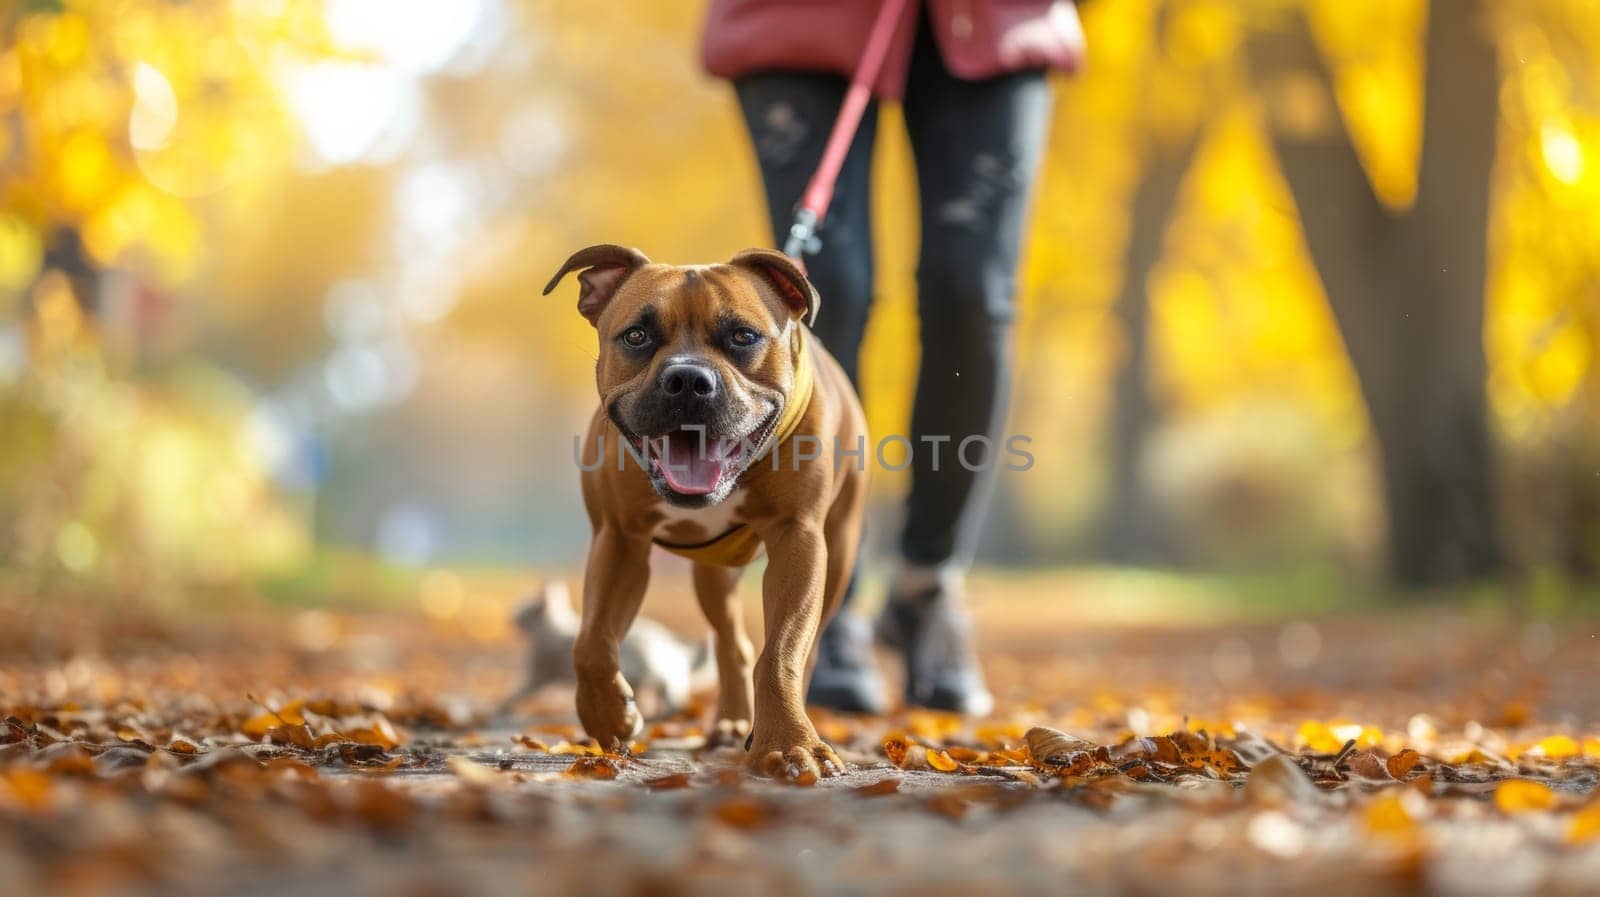 A dog walking on a leash in the fall leaves, AI by starush